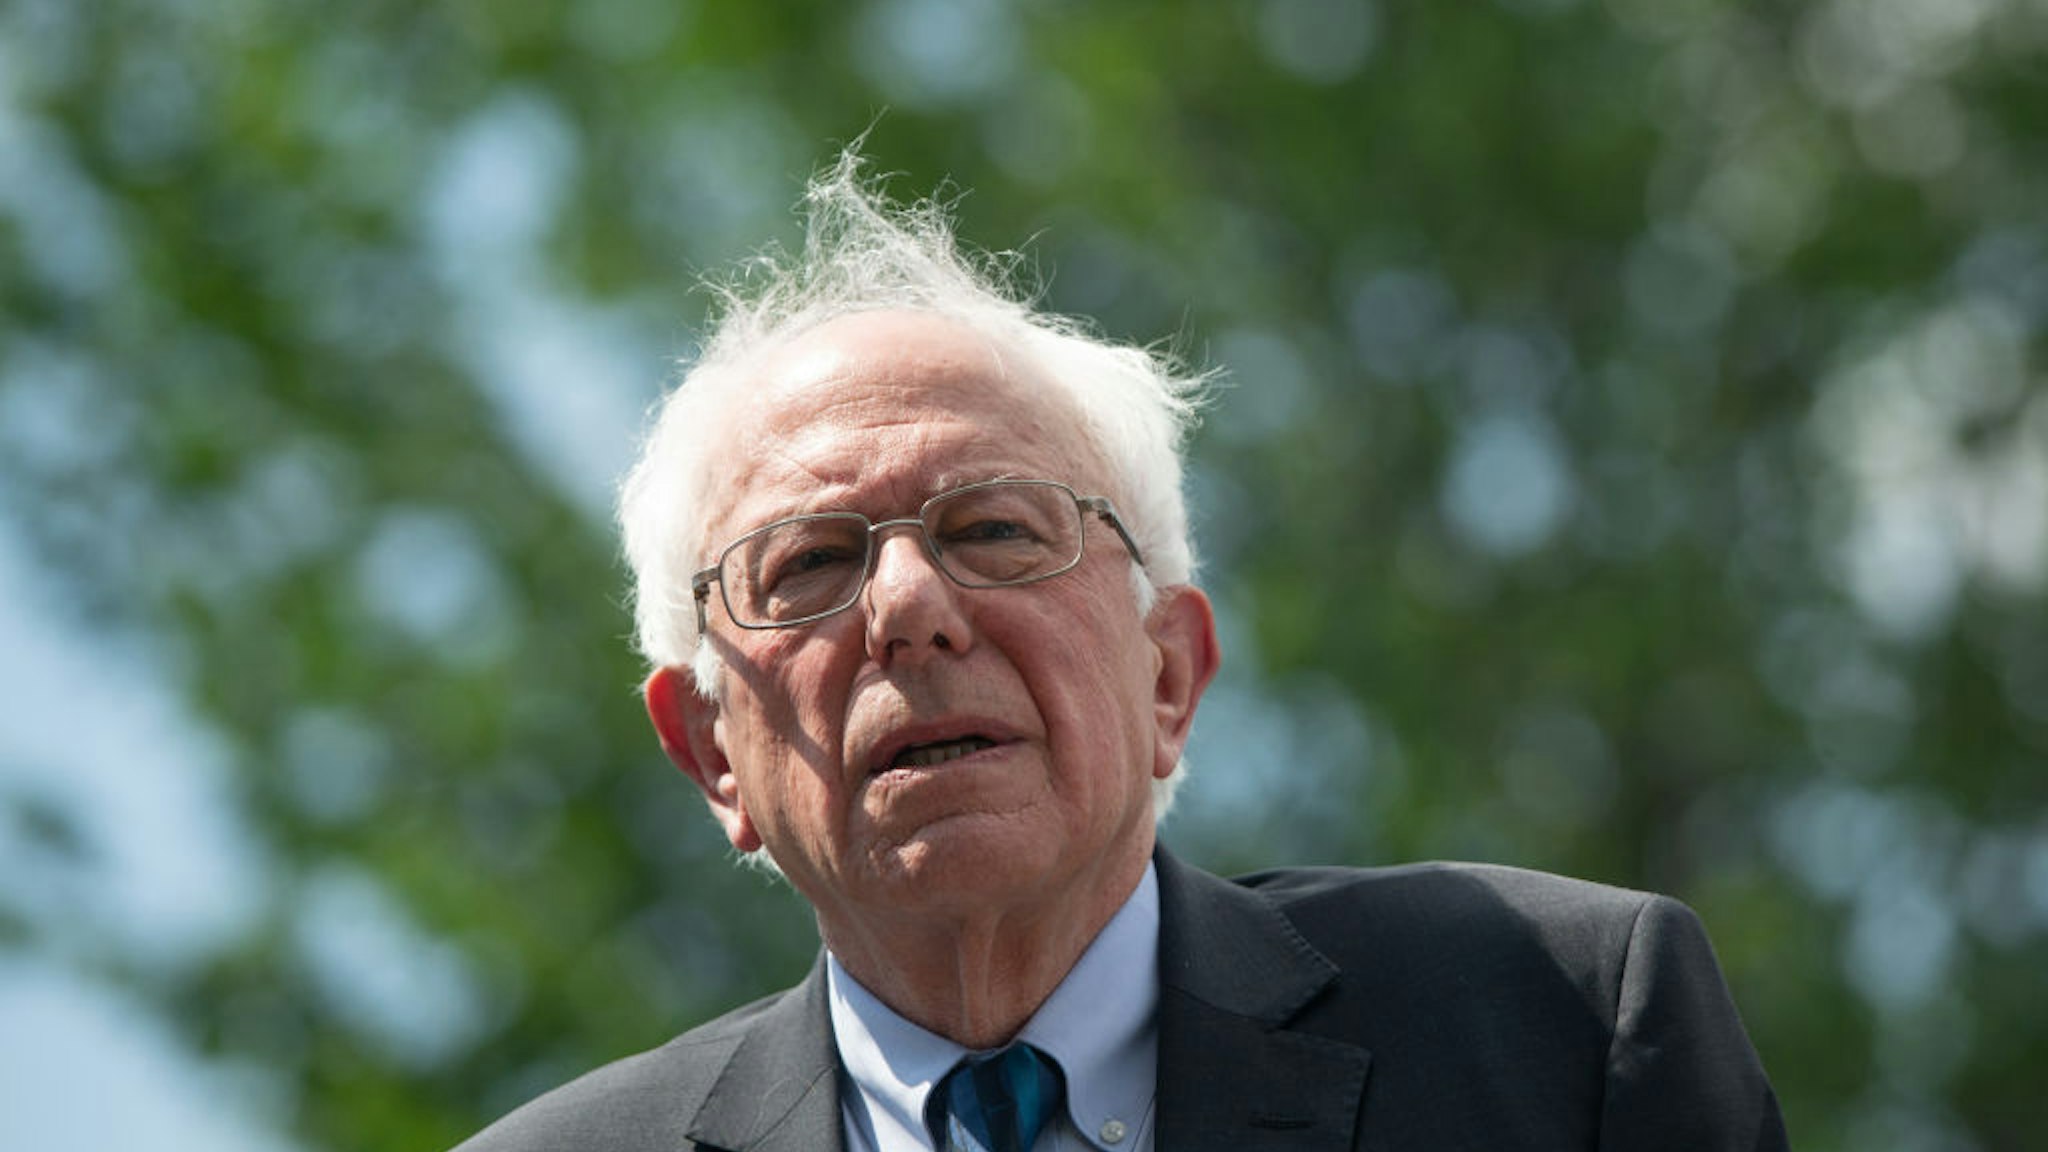 Bernie Sanders attends a press conference to introduce college affordability legislation